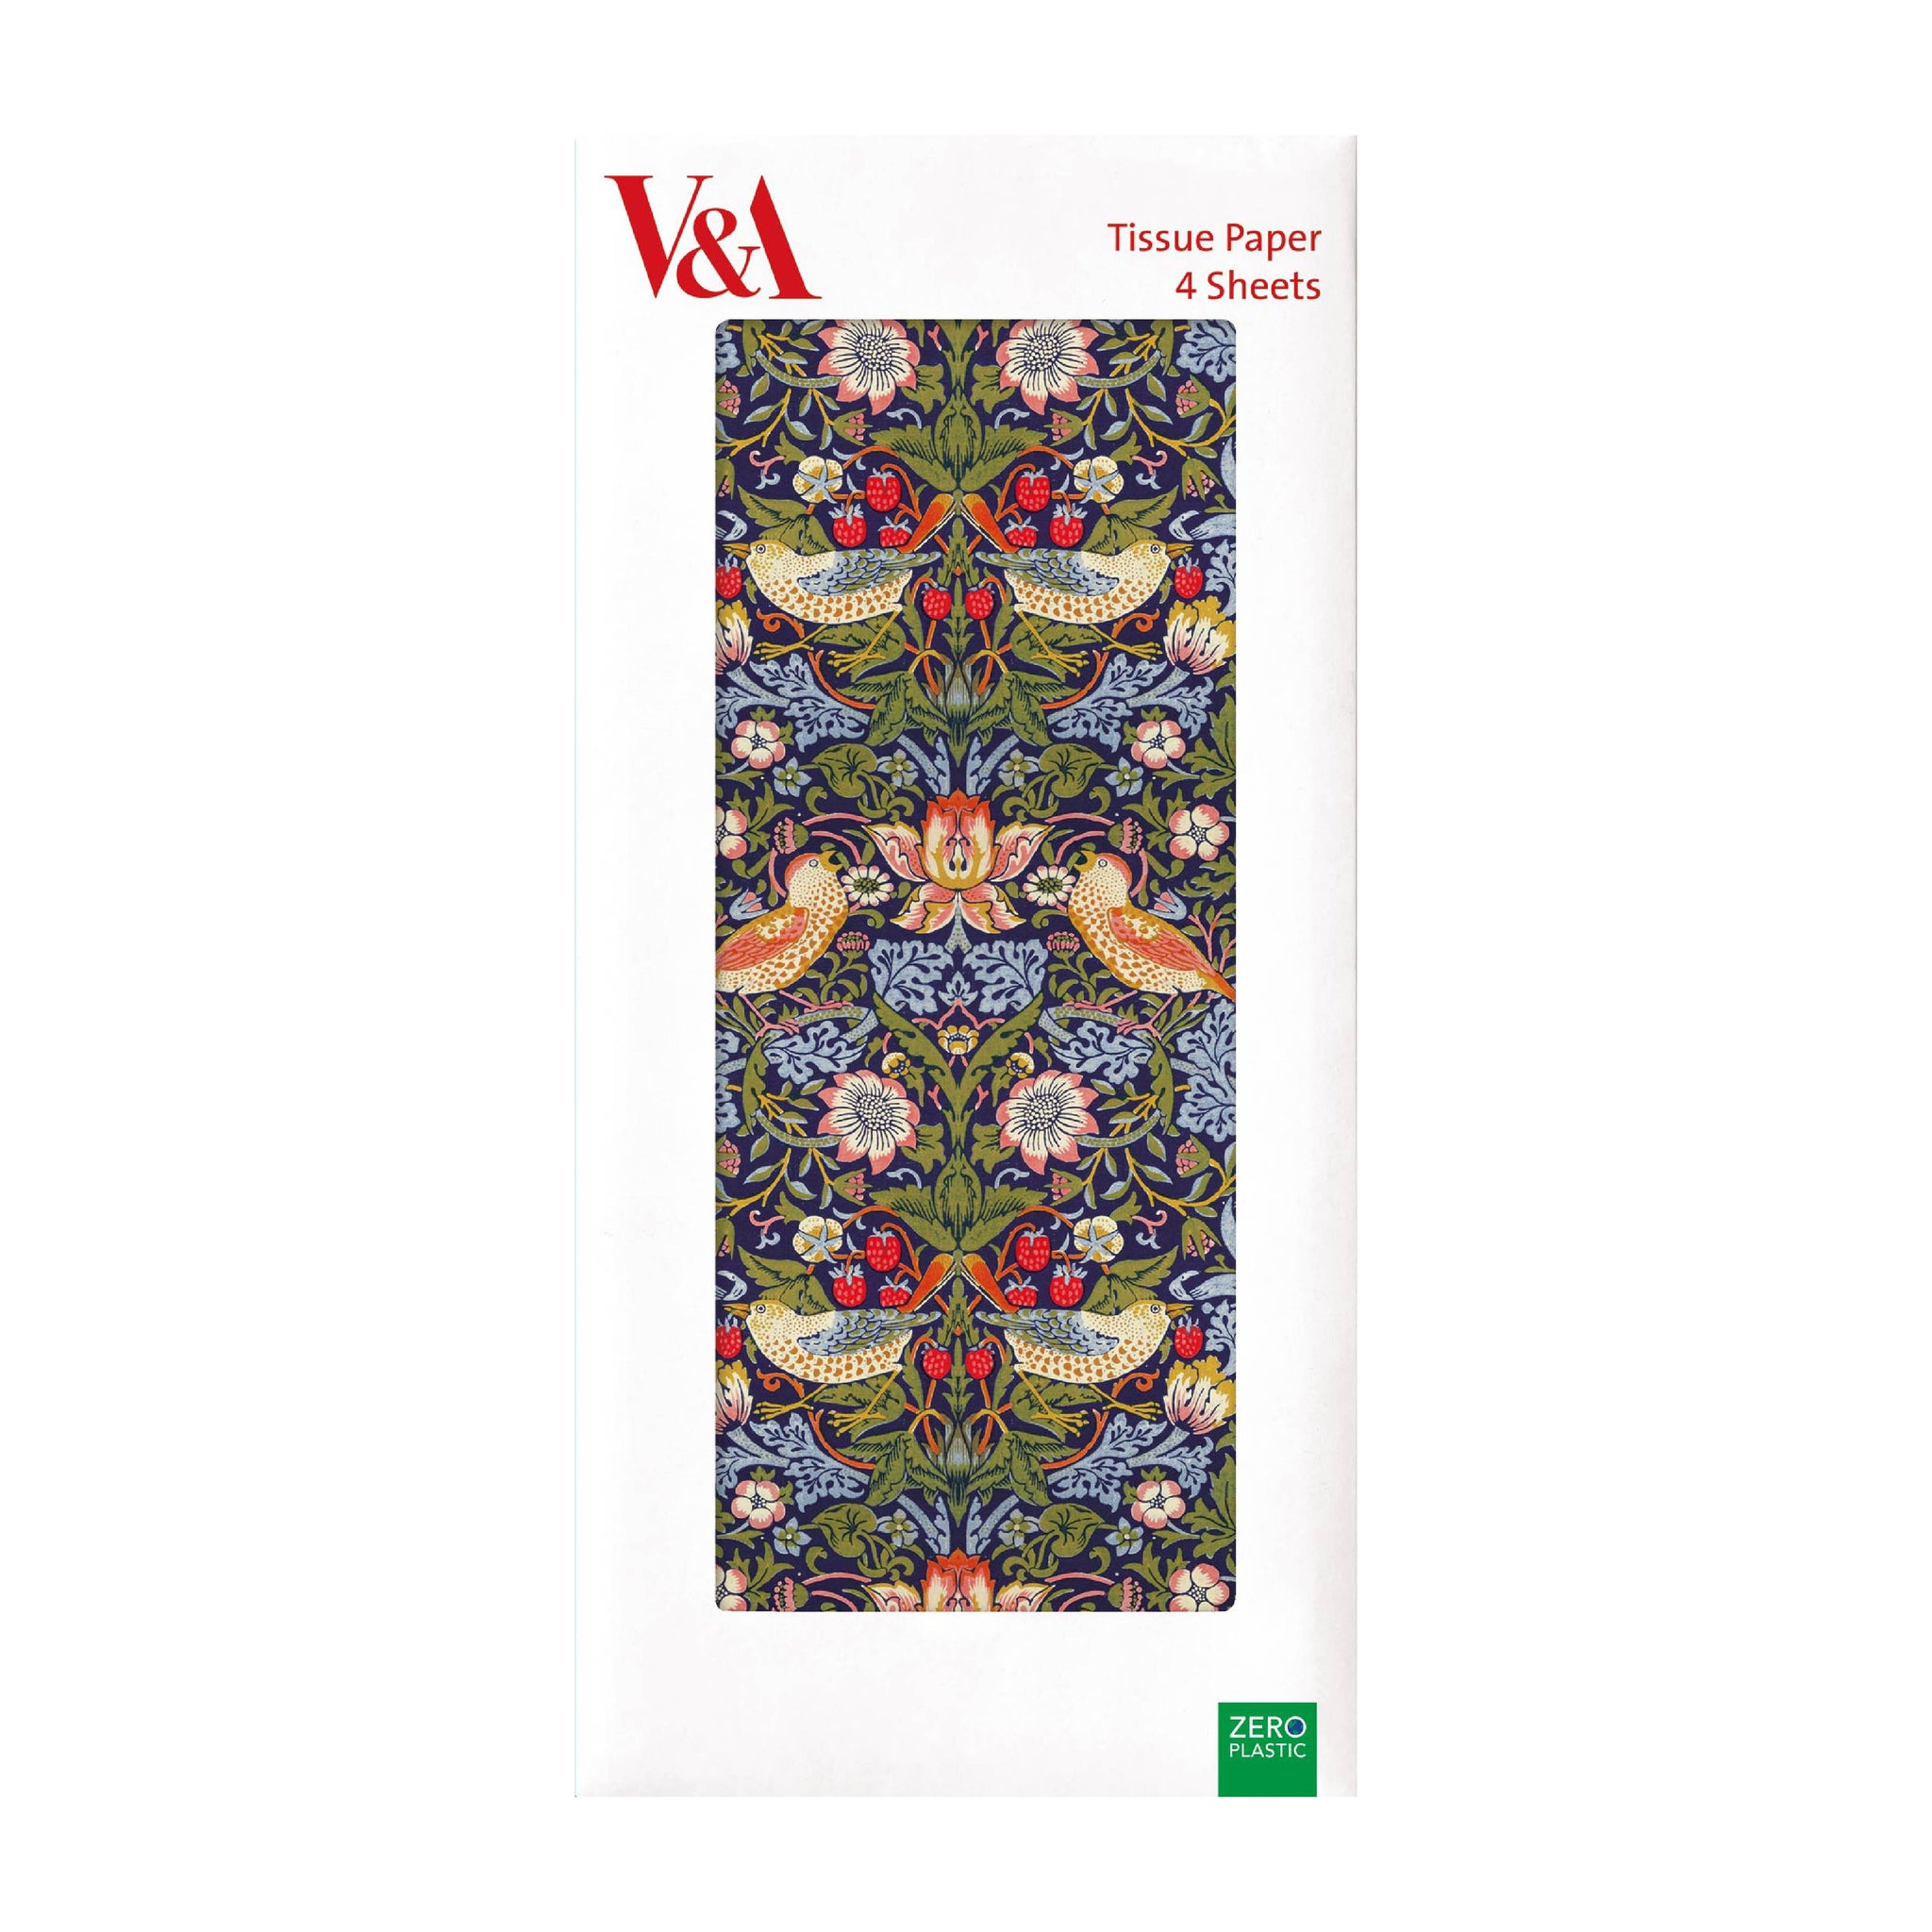 Pack of tissue paper with 'Strawberry Thief' design, featuring a floral design with orange anbd blue birds, strawberries and blue and green leaves.